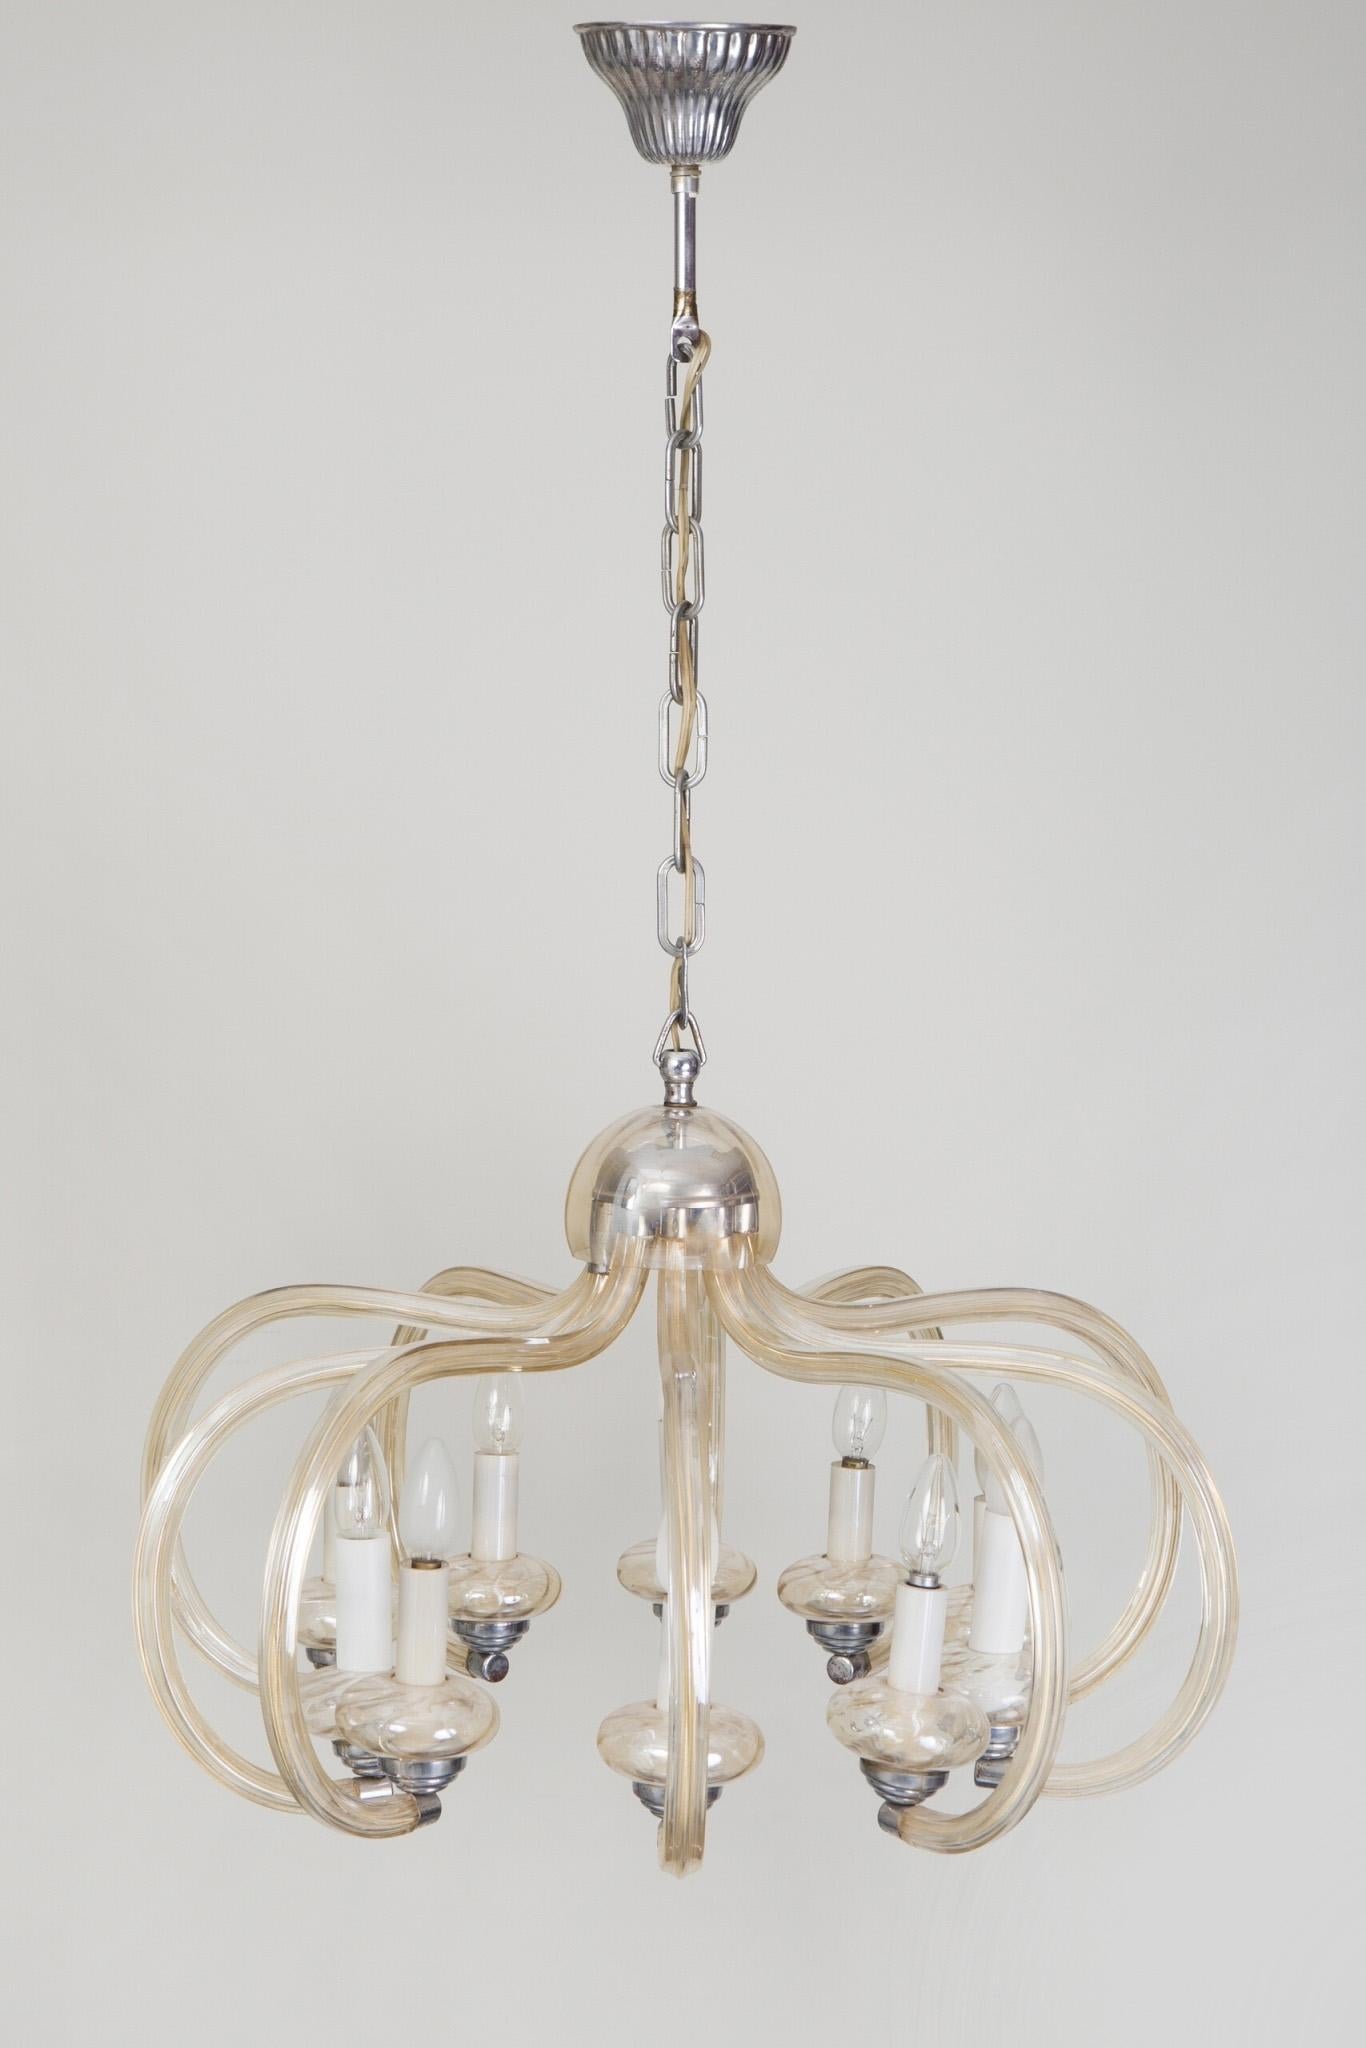 Chandelier made out of glass in the 1920s
Original pristine condition. No damages.